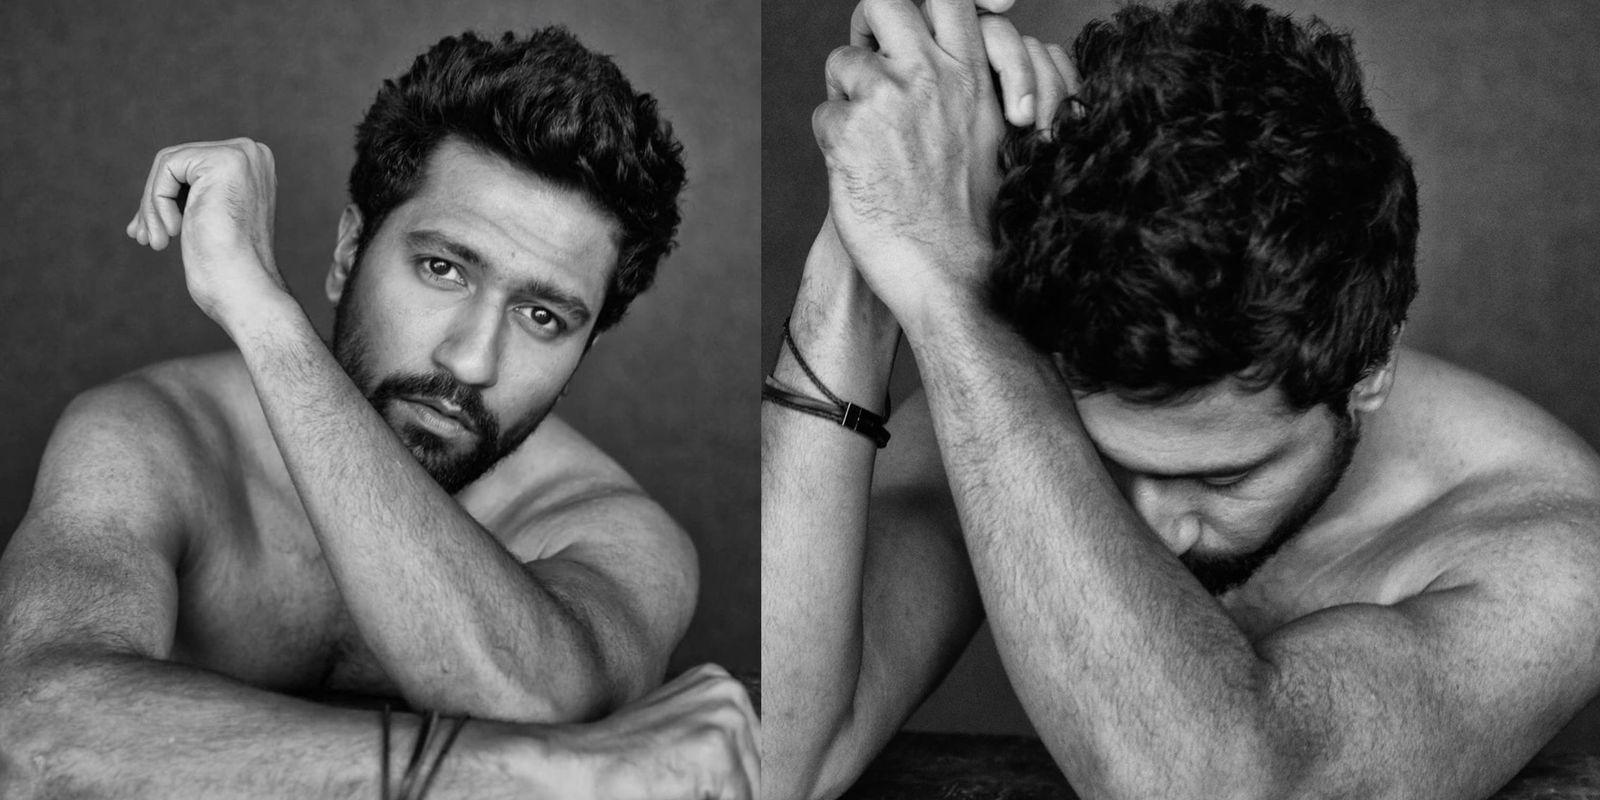 Vicky Kaushal Shares Outfit Of The Day Pics Without Any Outfit, And It’s The Best Thing You’ll See On The Internet Today!